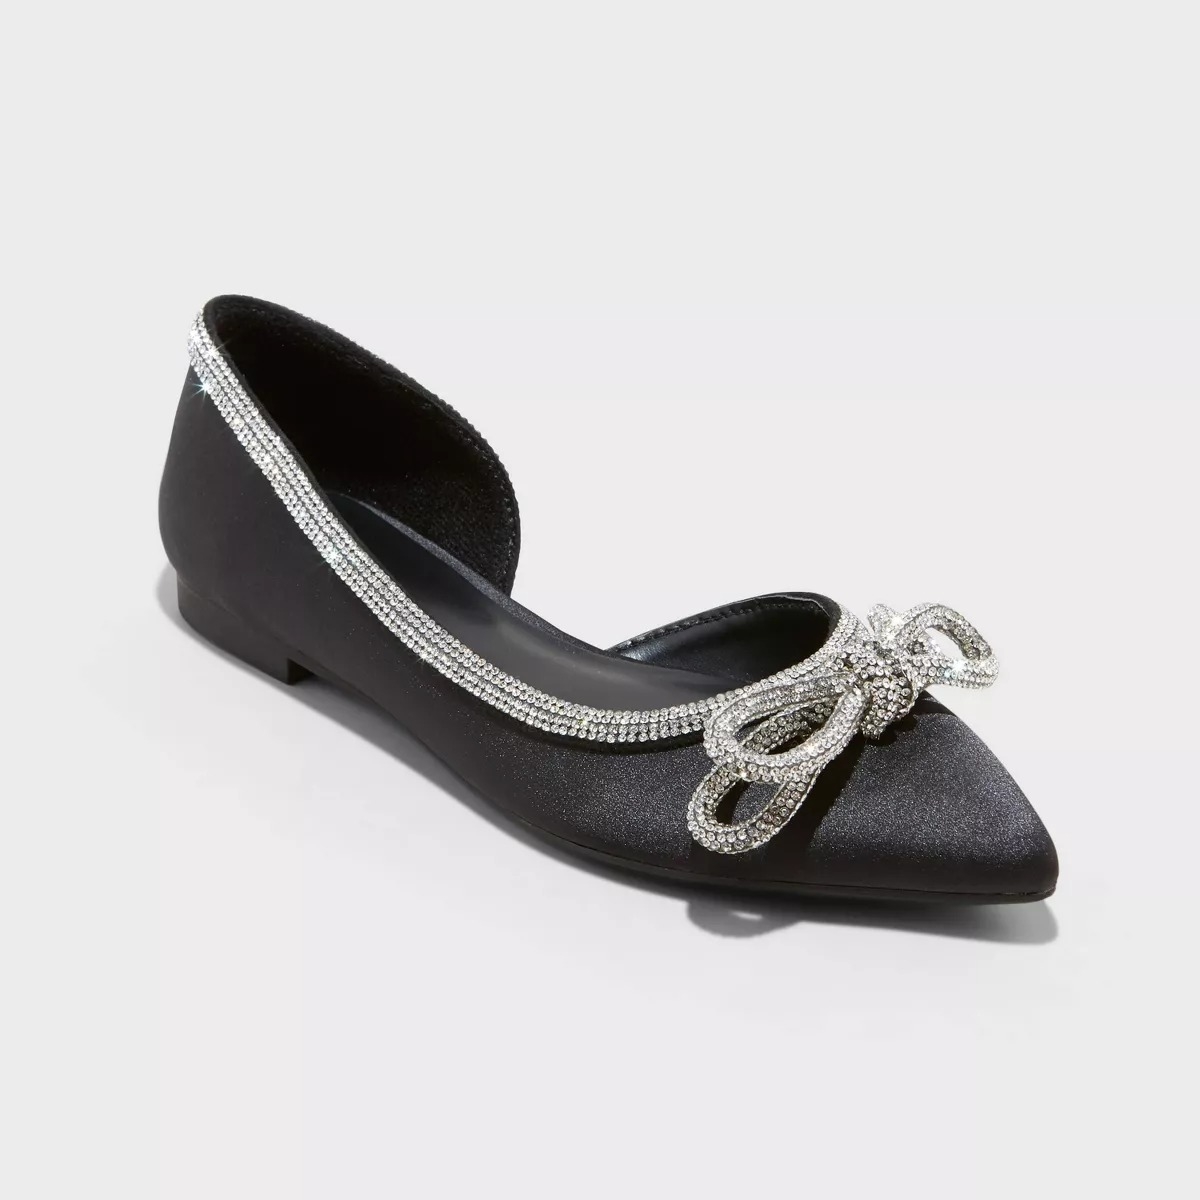 a pair of black ballet flats with a silver sparkly bow